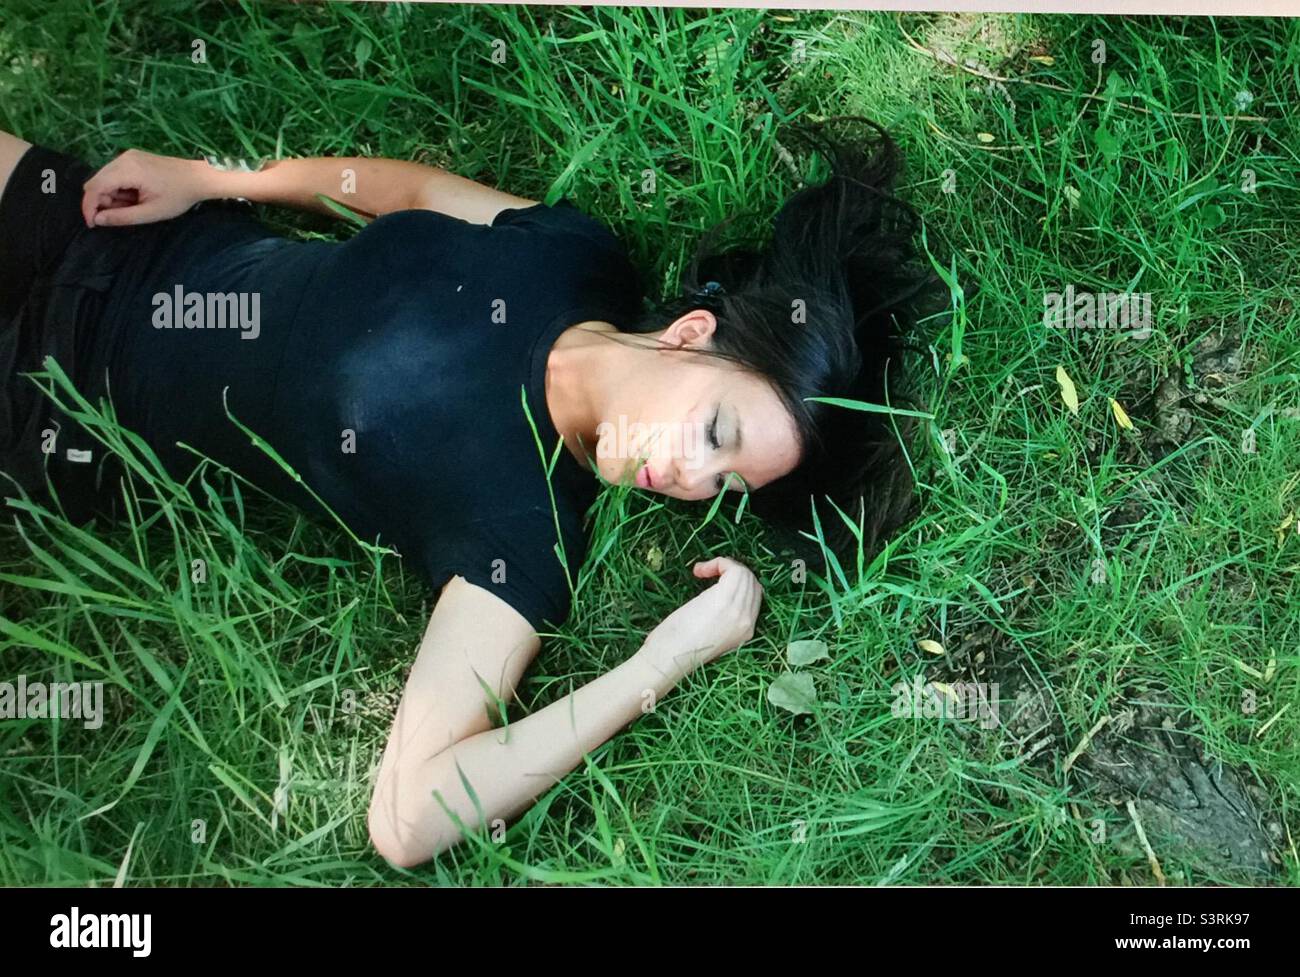 Young woman, sunning herself, on the park lawn, green grass, creek, sunny day, black top, shorts Stock Photo